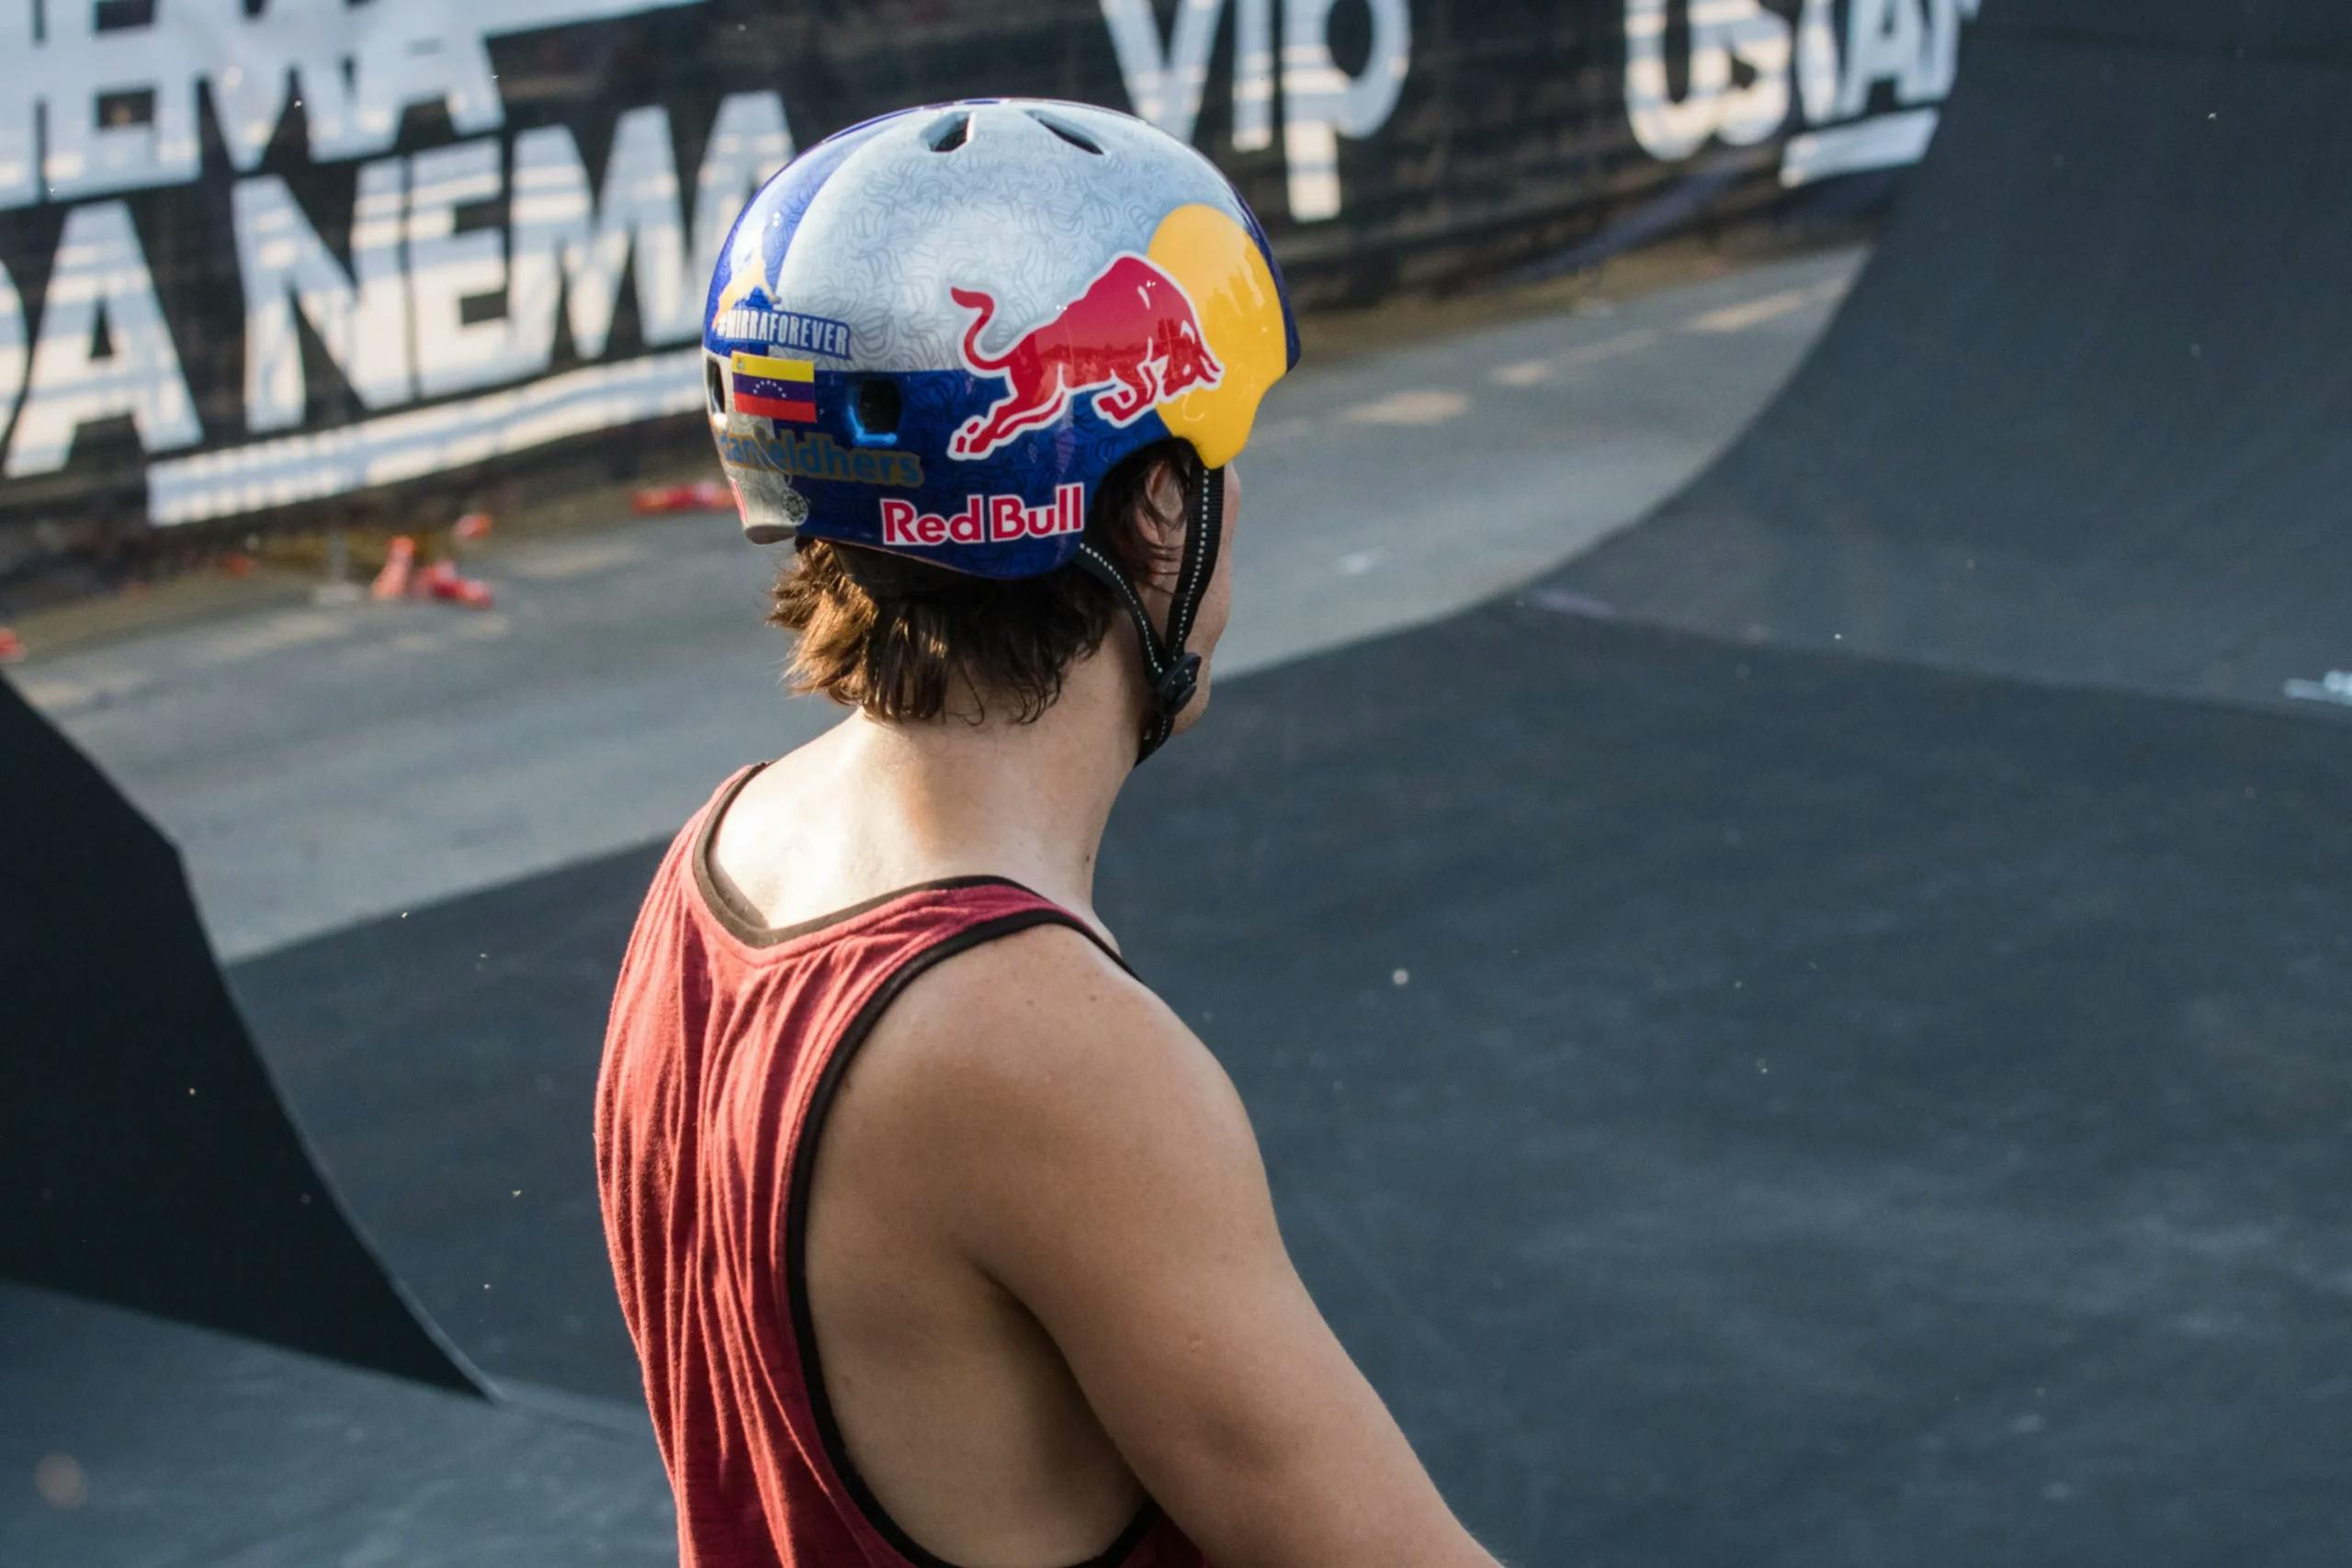 Person in a Red Bull helmet looking over a skate park ramp.